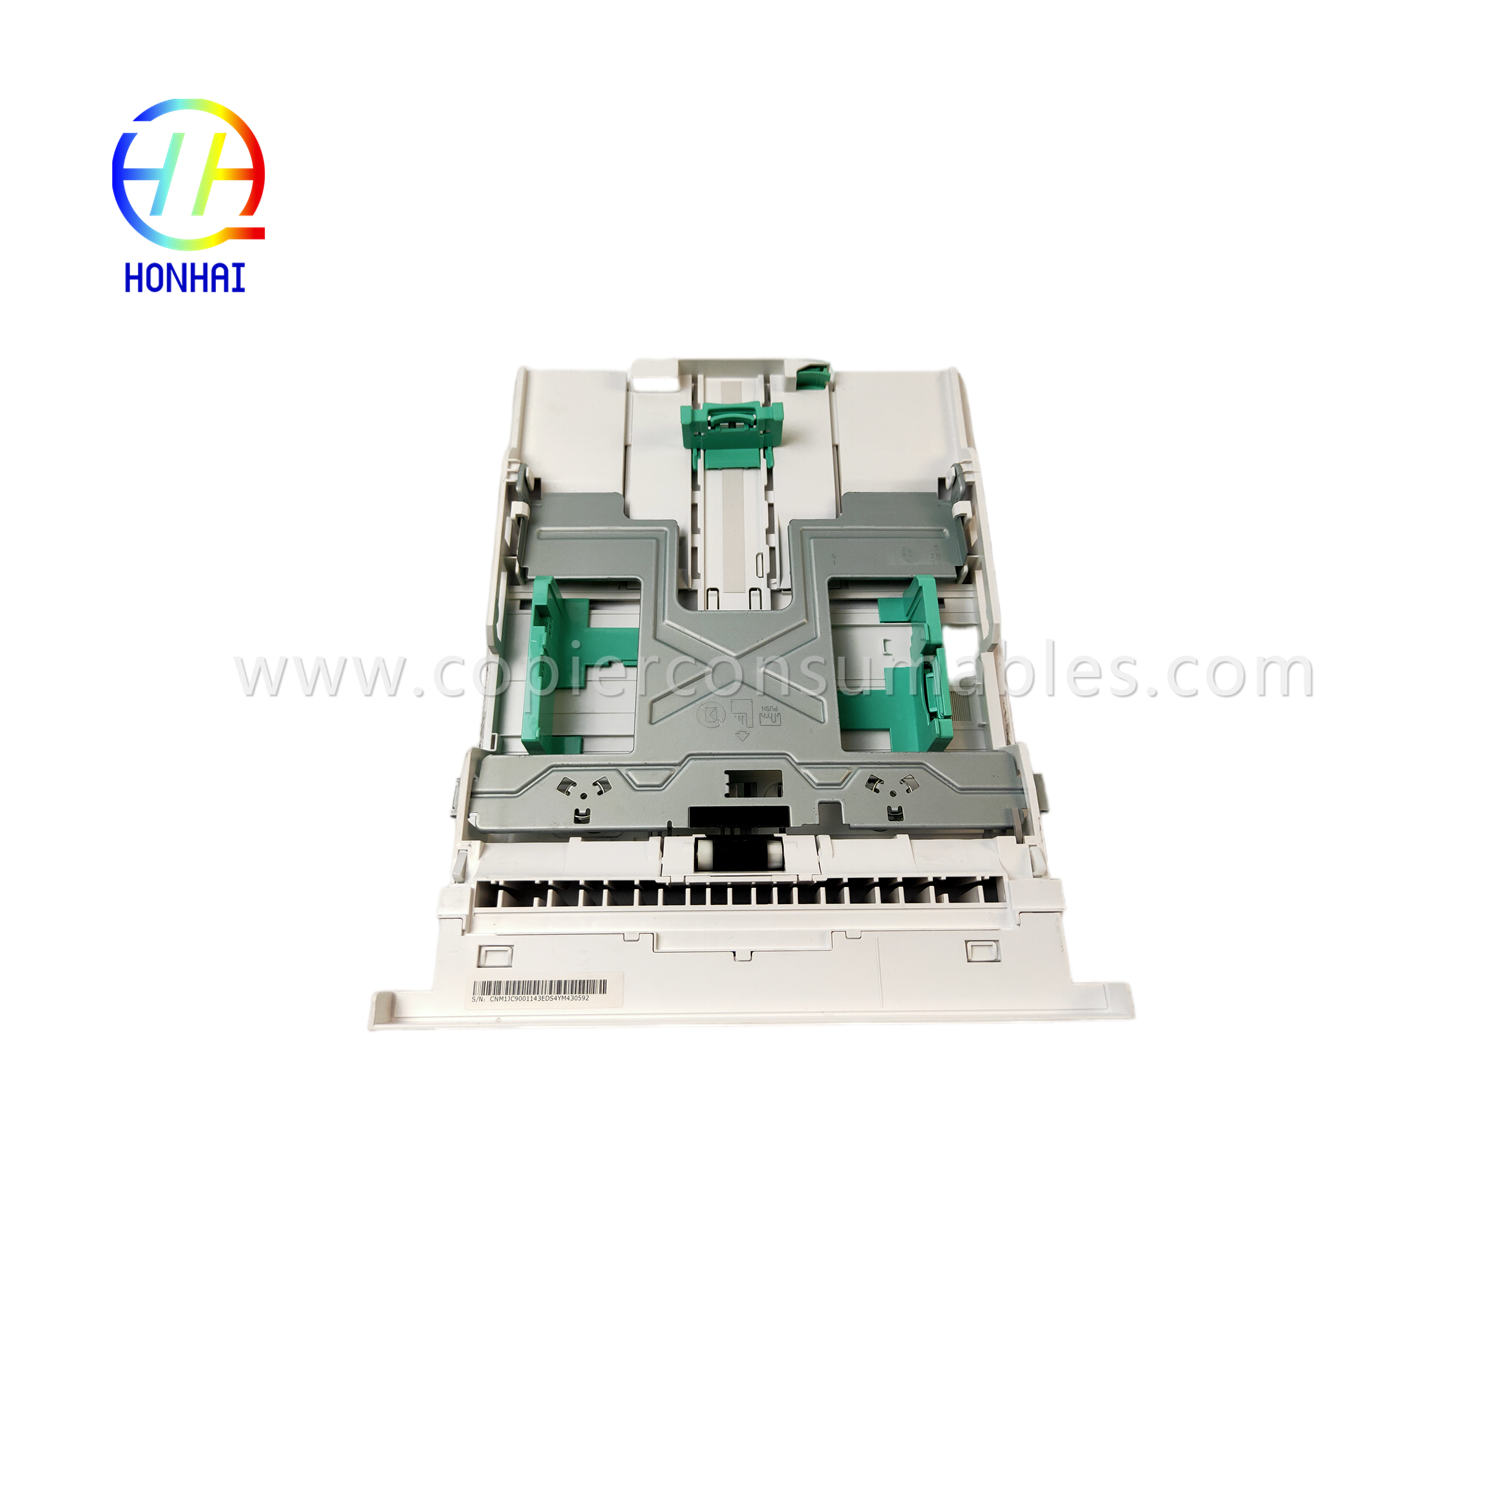 https://c585.goodao.net/paper-tray-assemble-for-xerox-phaser-3320dni-workcentre-3315dn-3325dni-050n00650